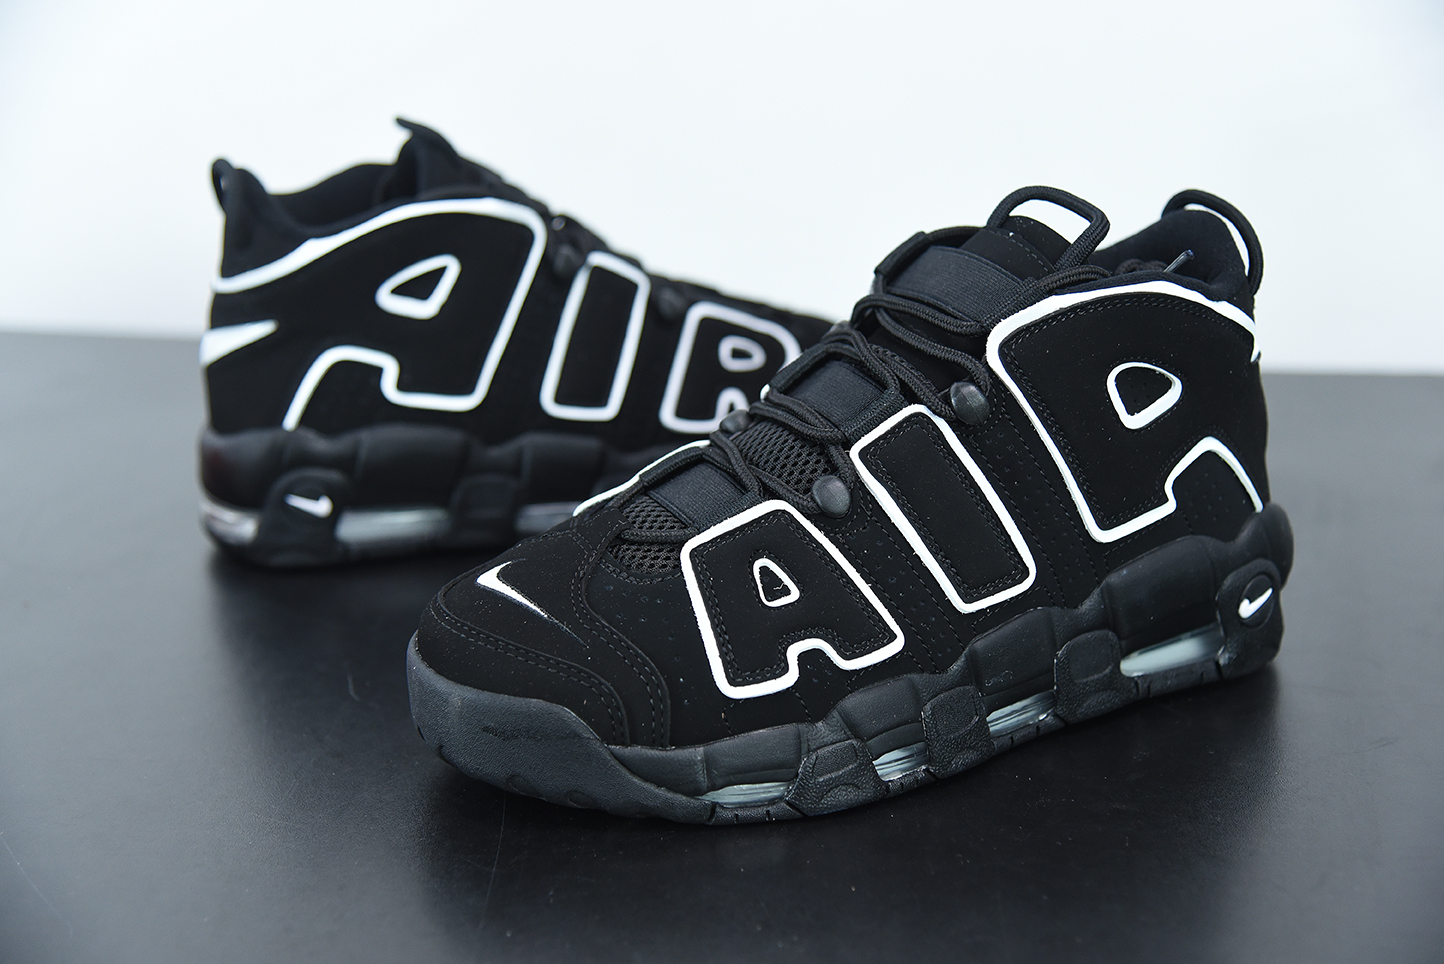 MH468 NIKE AIR MORE UPTEMPO 